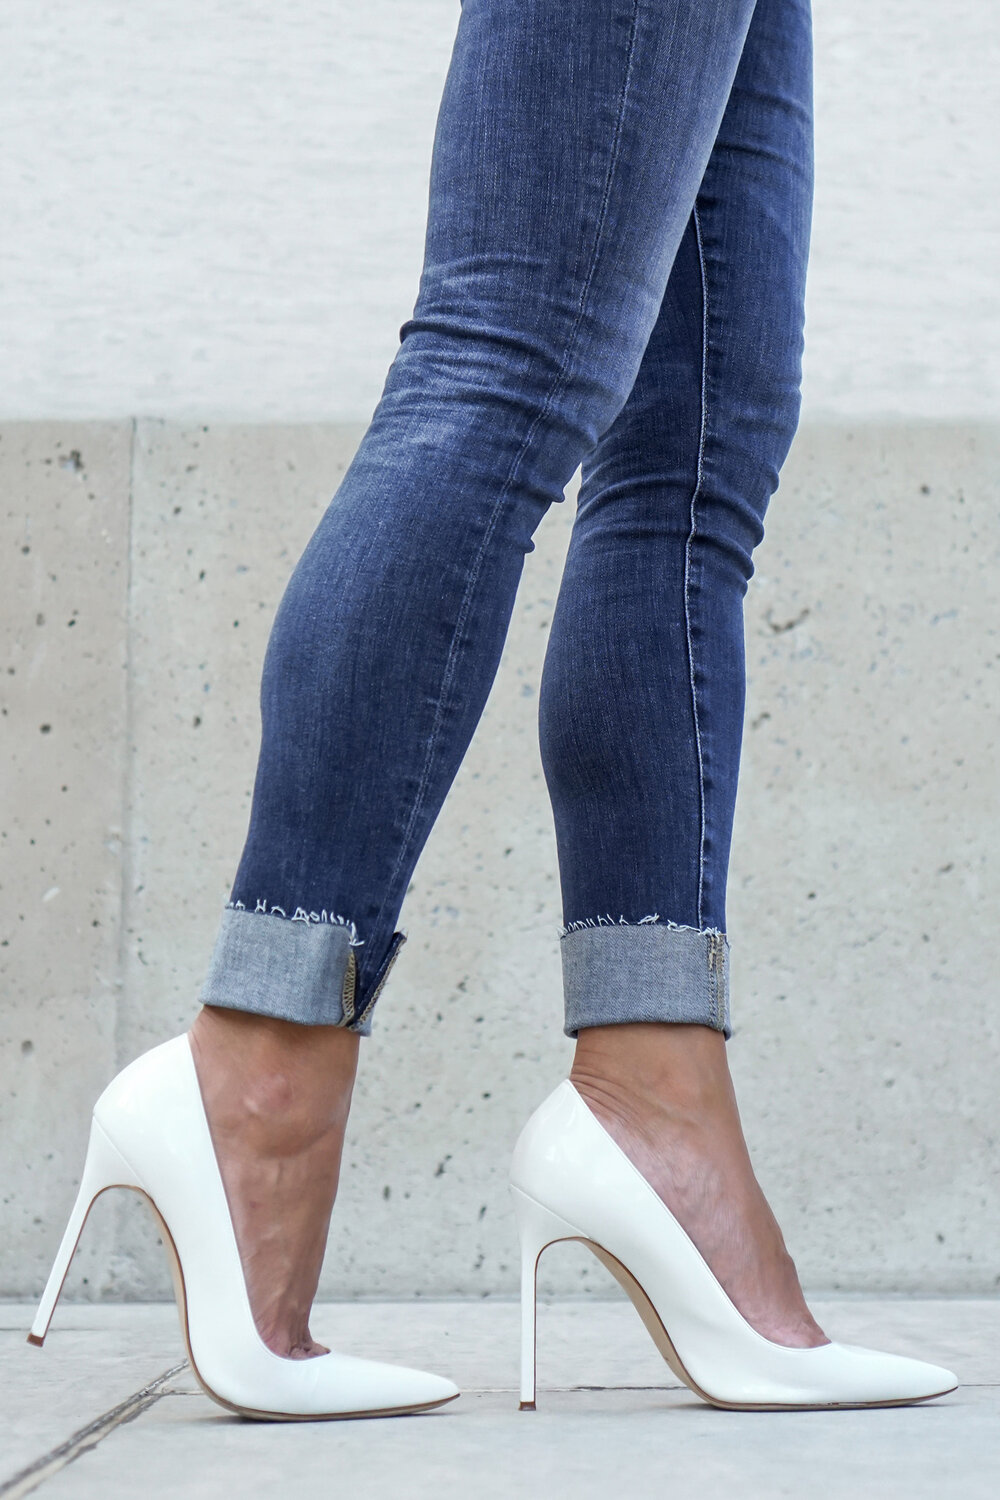 White Pumps, White High Heels, How to Wear White Heels